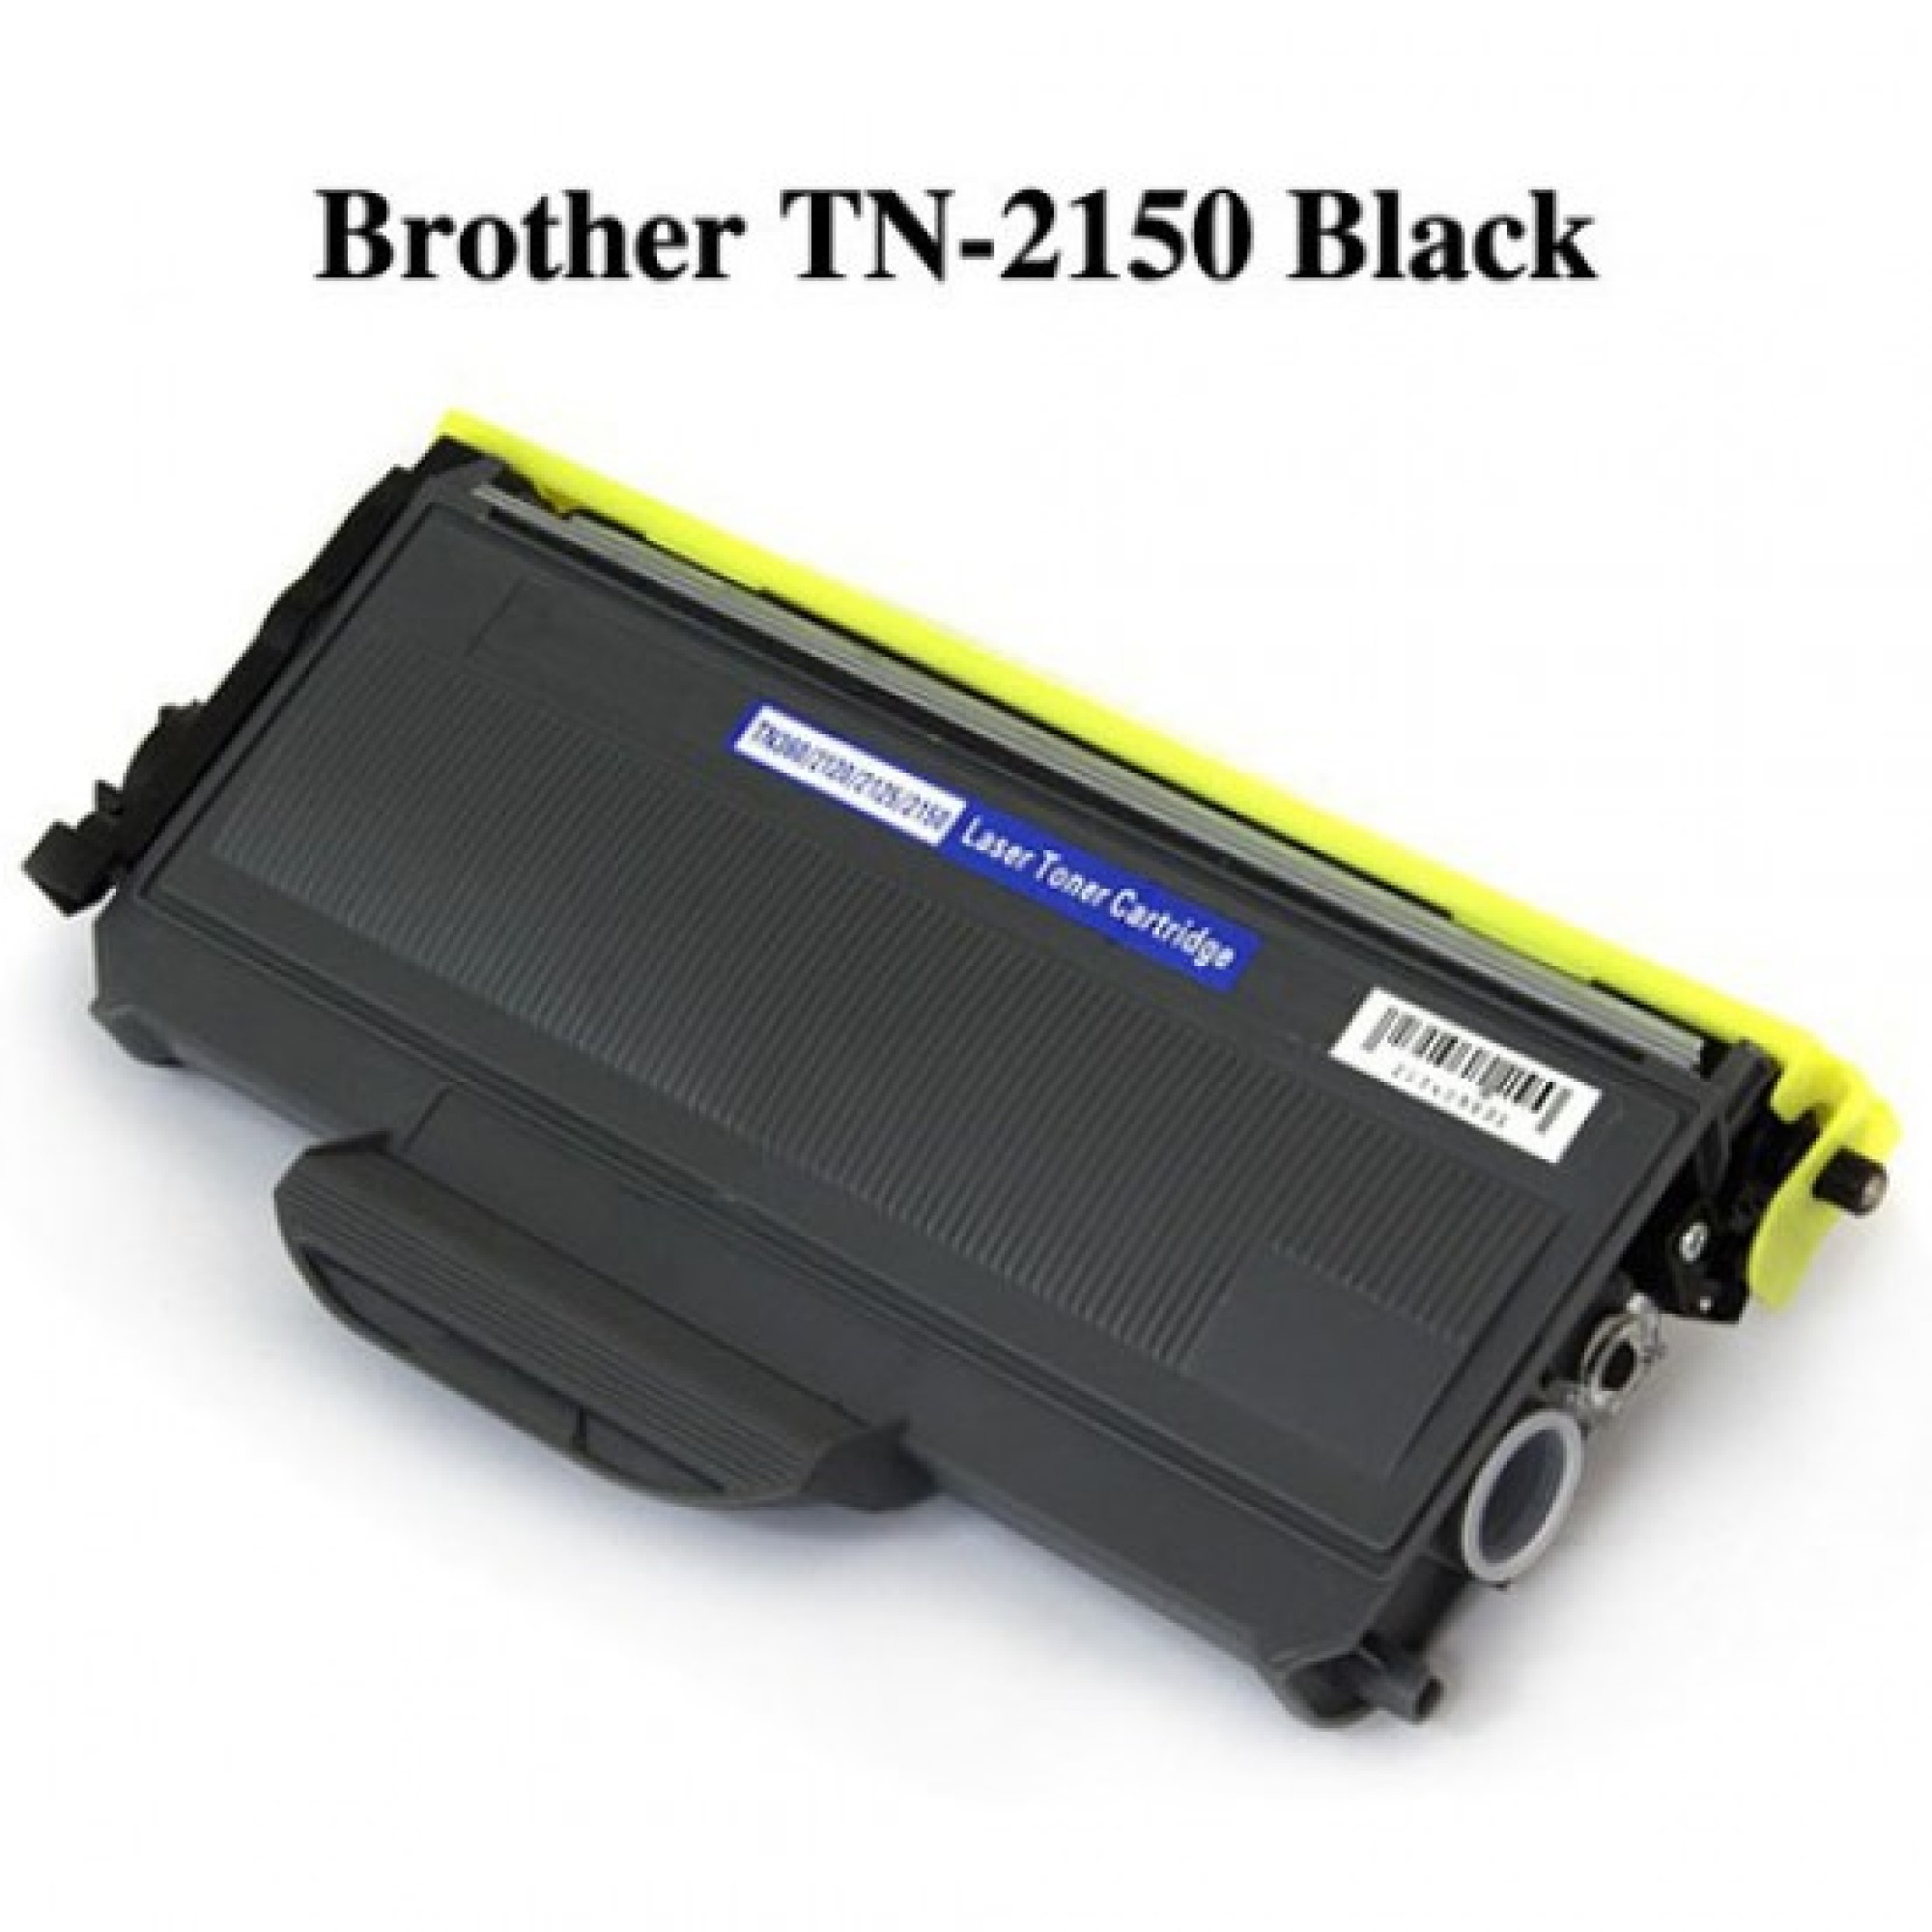 Tn2150 Cartridge for copy printer Brother MFC7840W